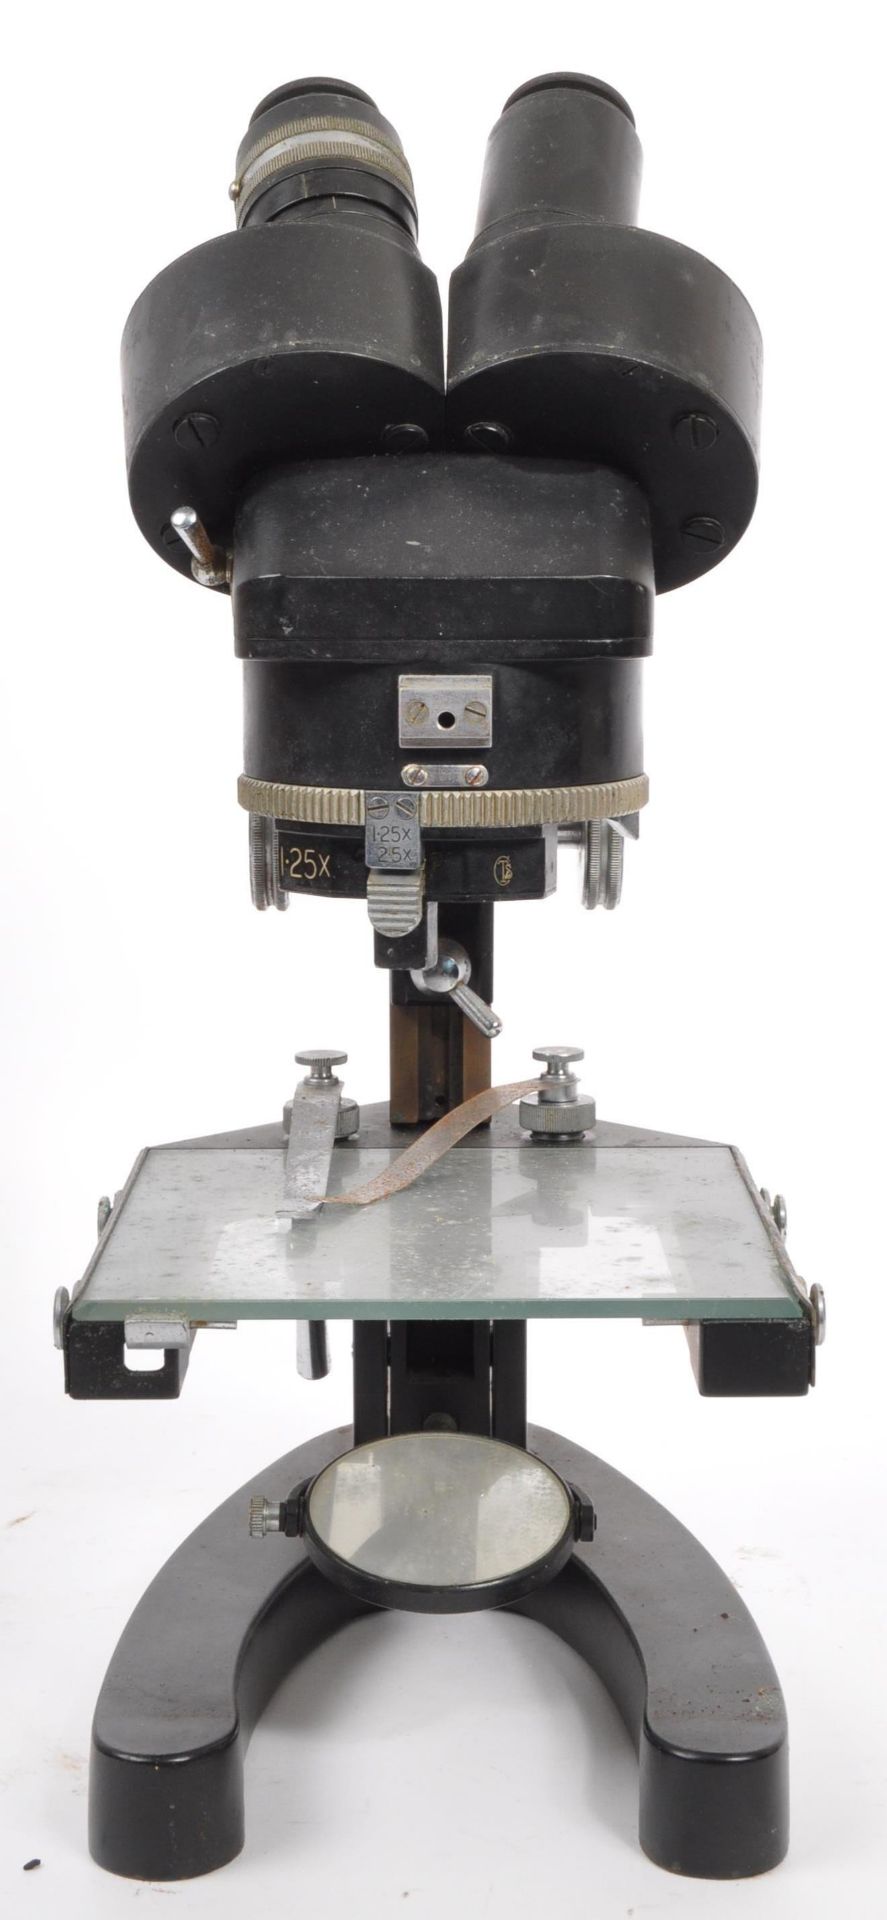 COOKE TROUGHTON & SIMMS CASED MICROSCOPE - Image 5 of 5